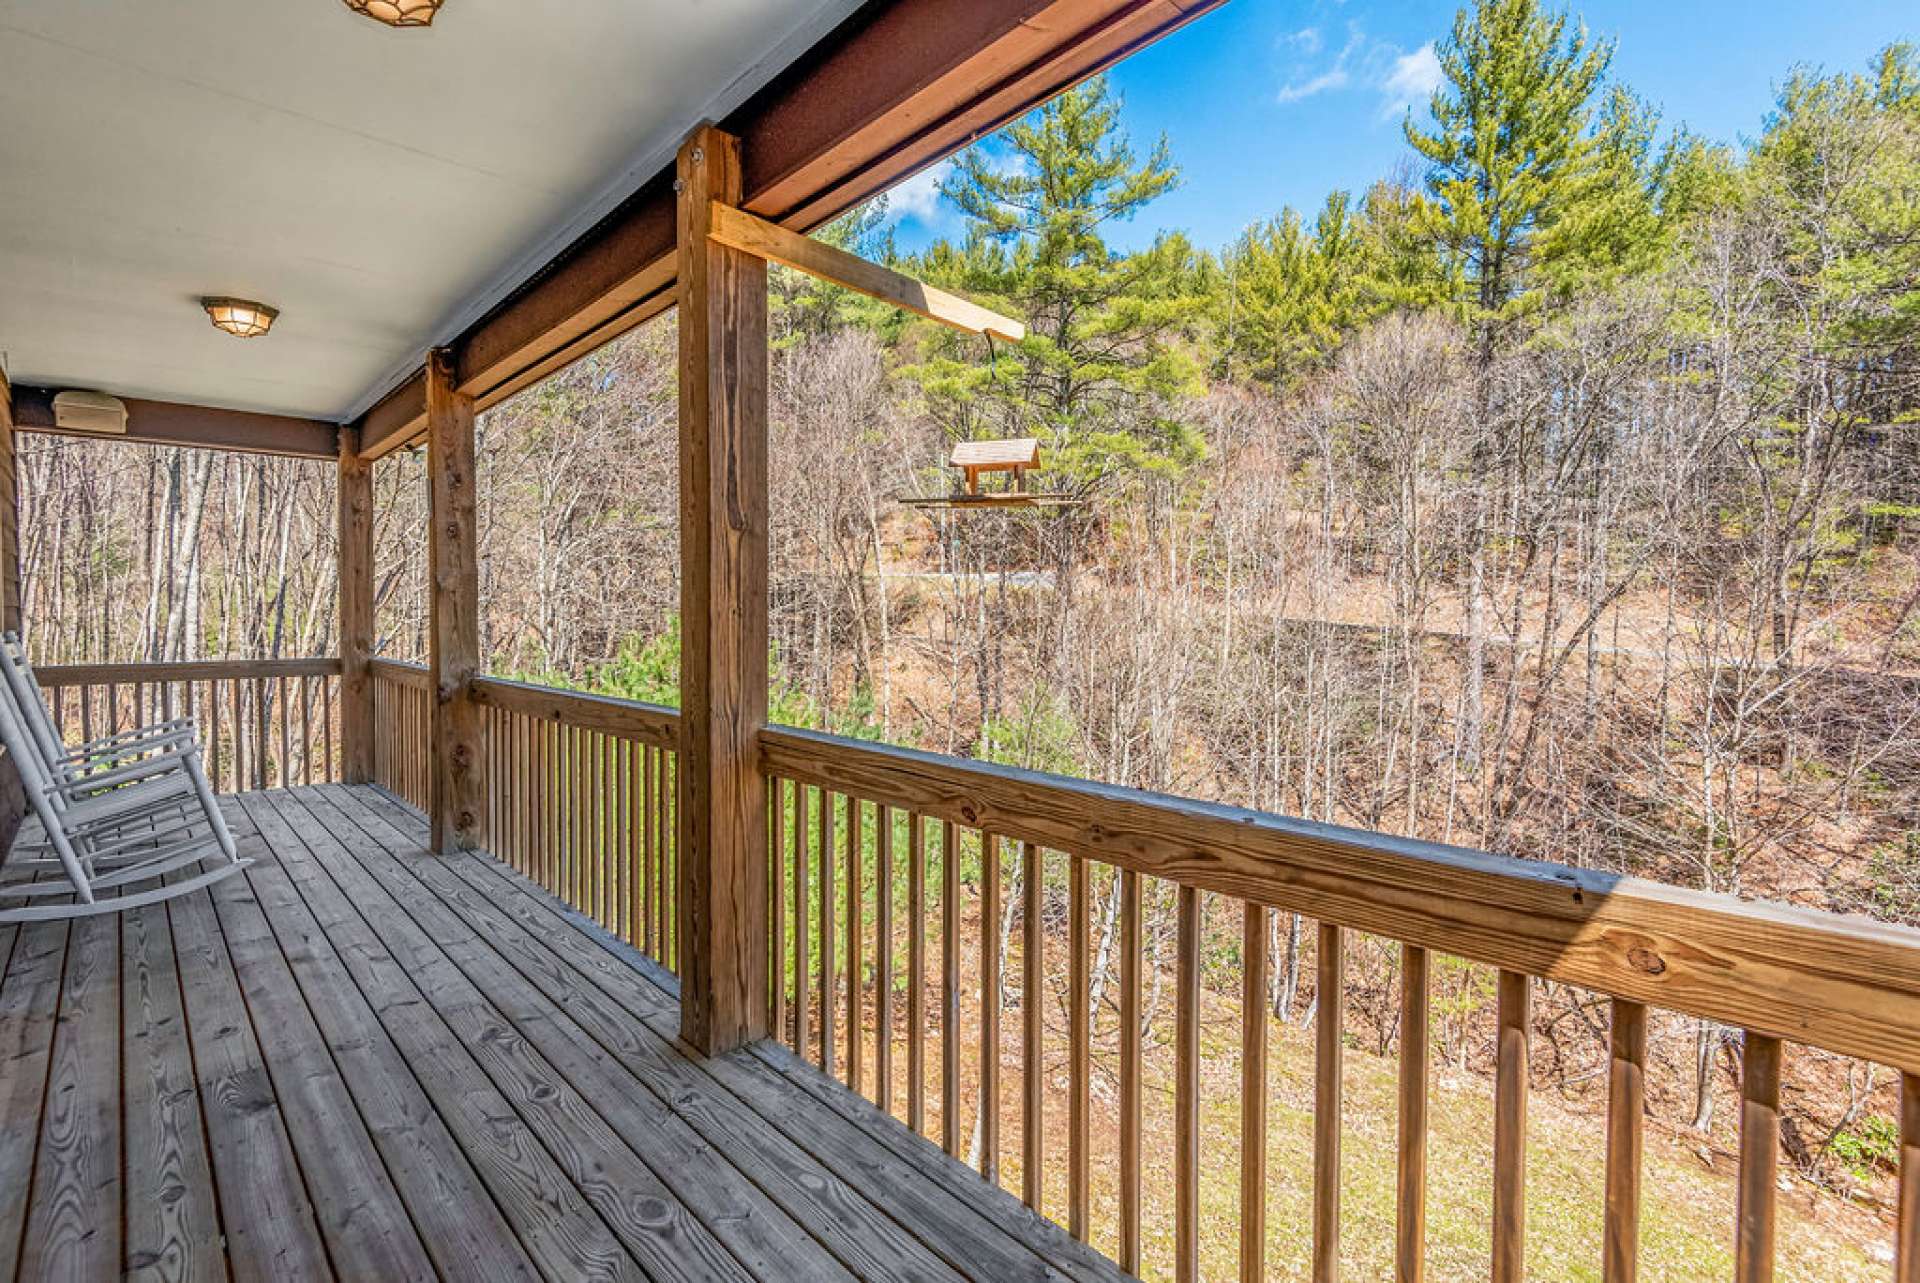 Enjoy afternoons sitting on the main level deck and enjoying the sounds of Nature and the noisy mountain creek below.